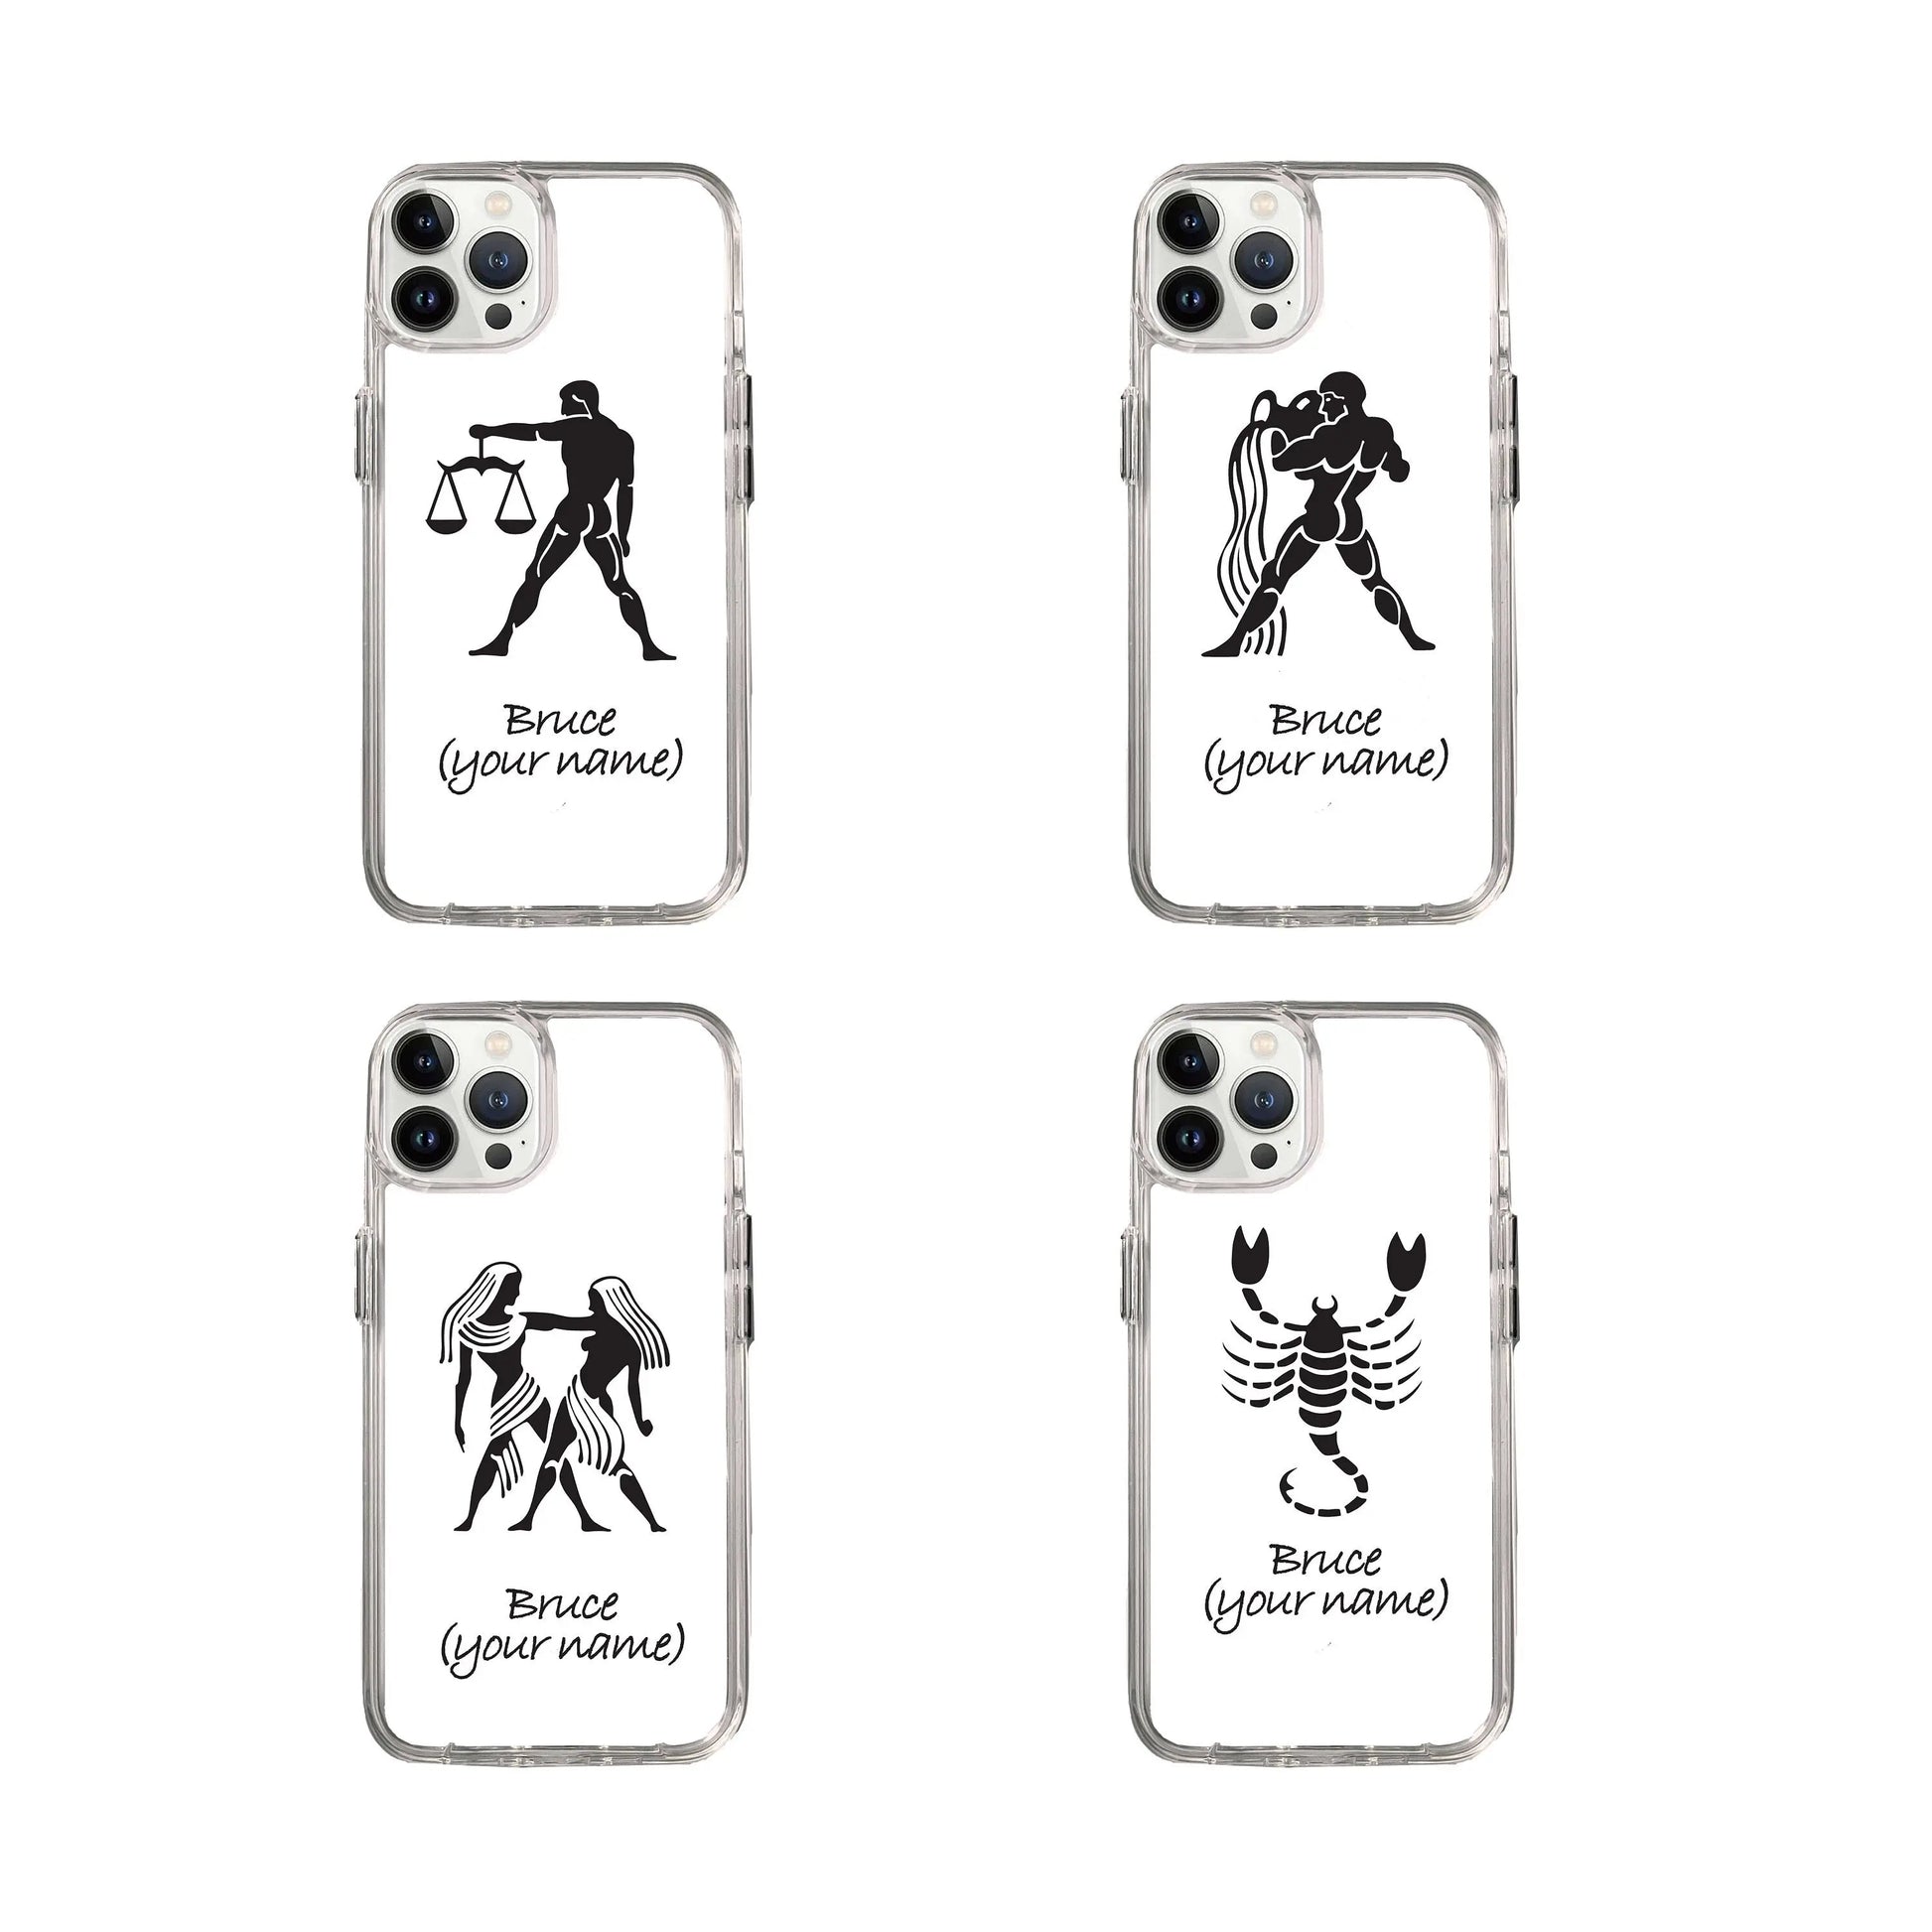 iPhone 6 to 8plus| Zodiac Signs Transparent Case Sunday's Creative